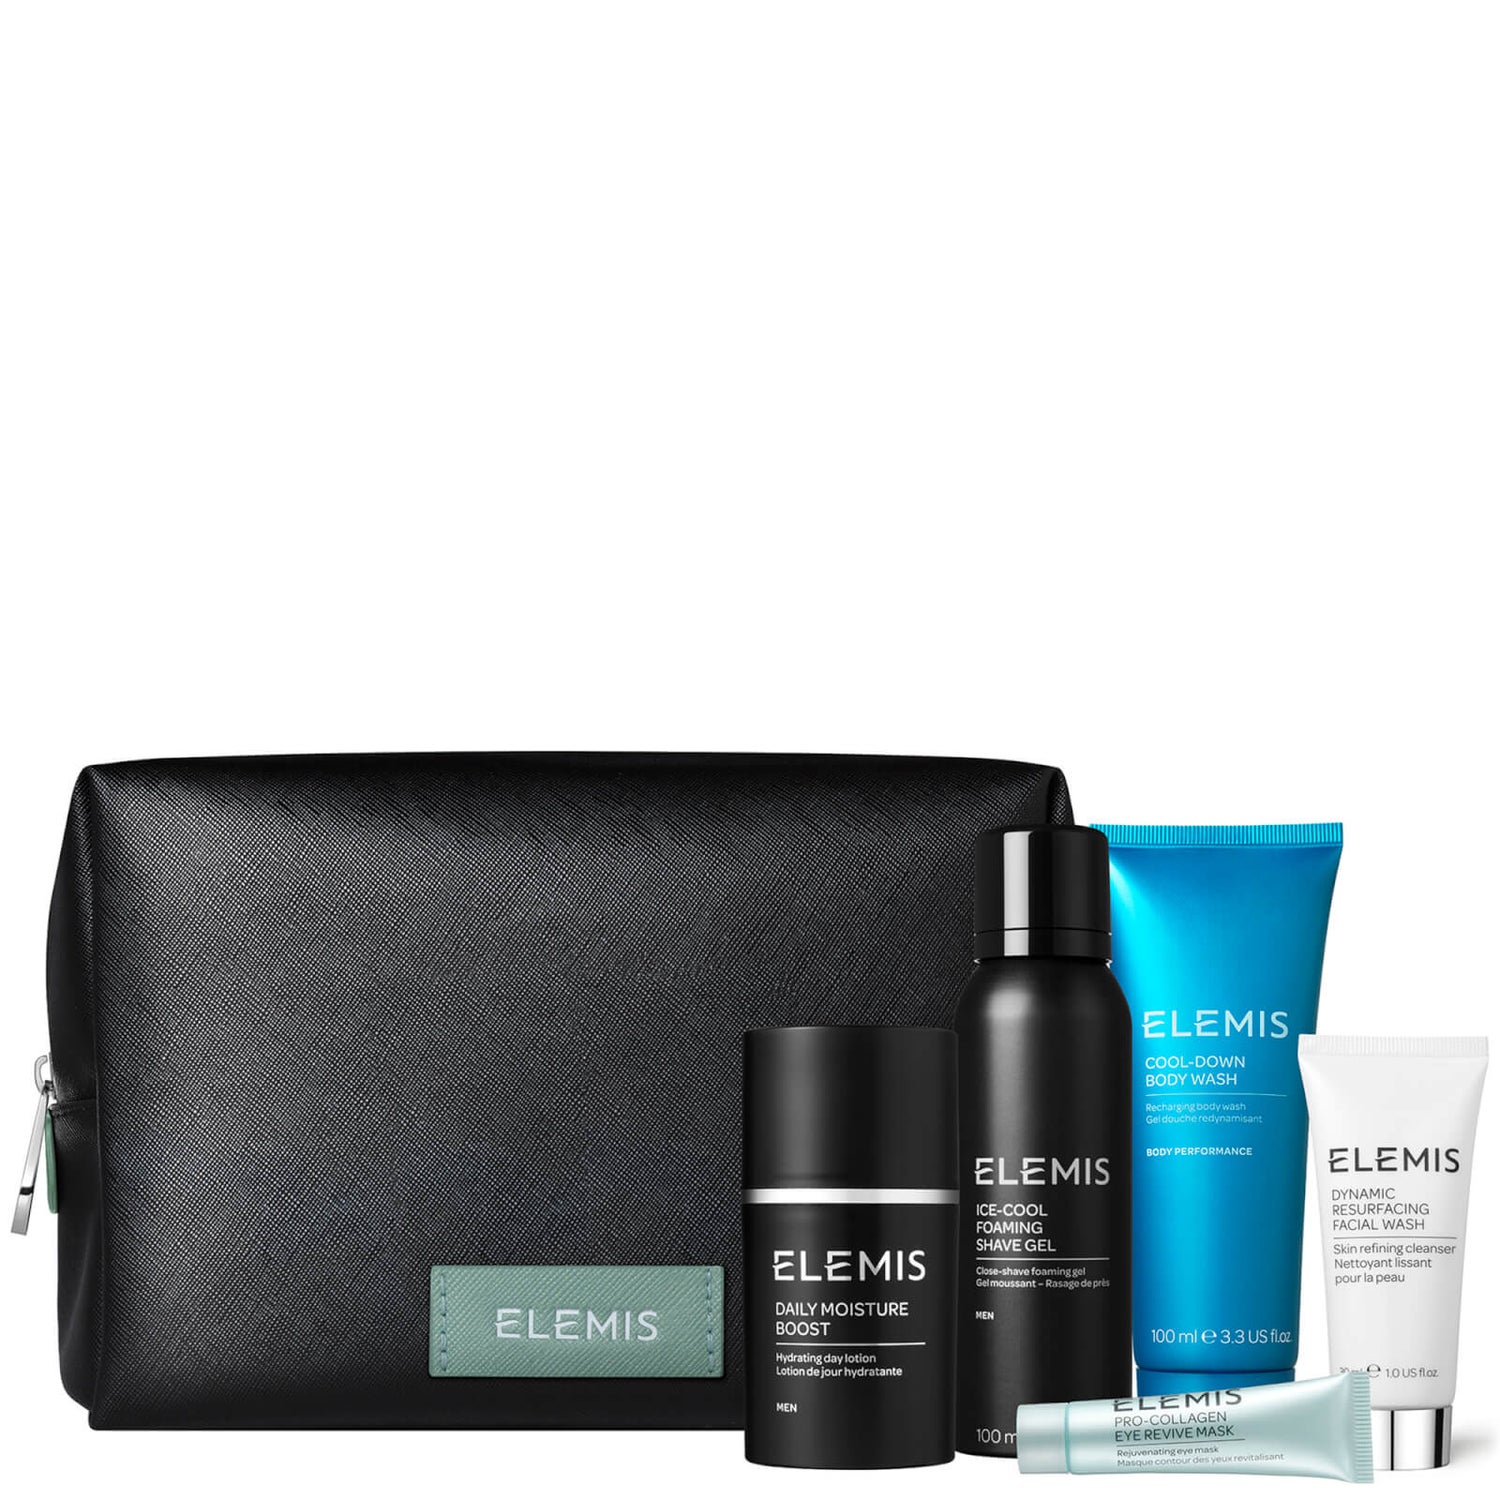 ELEMIS The Grooming Collection (Worth £88.00)